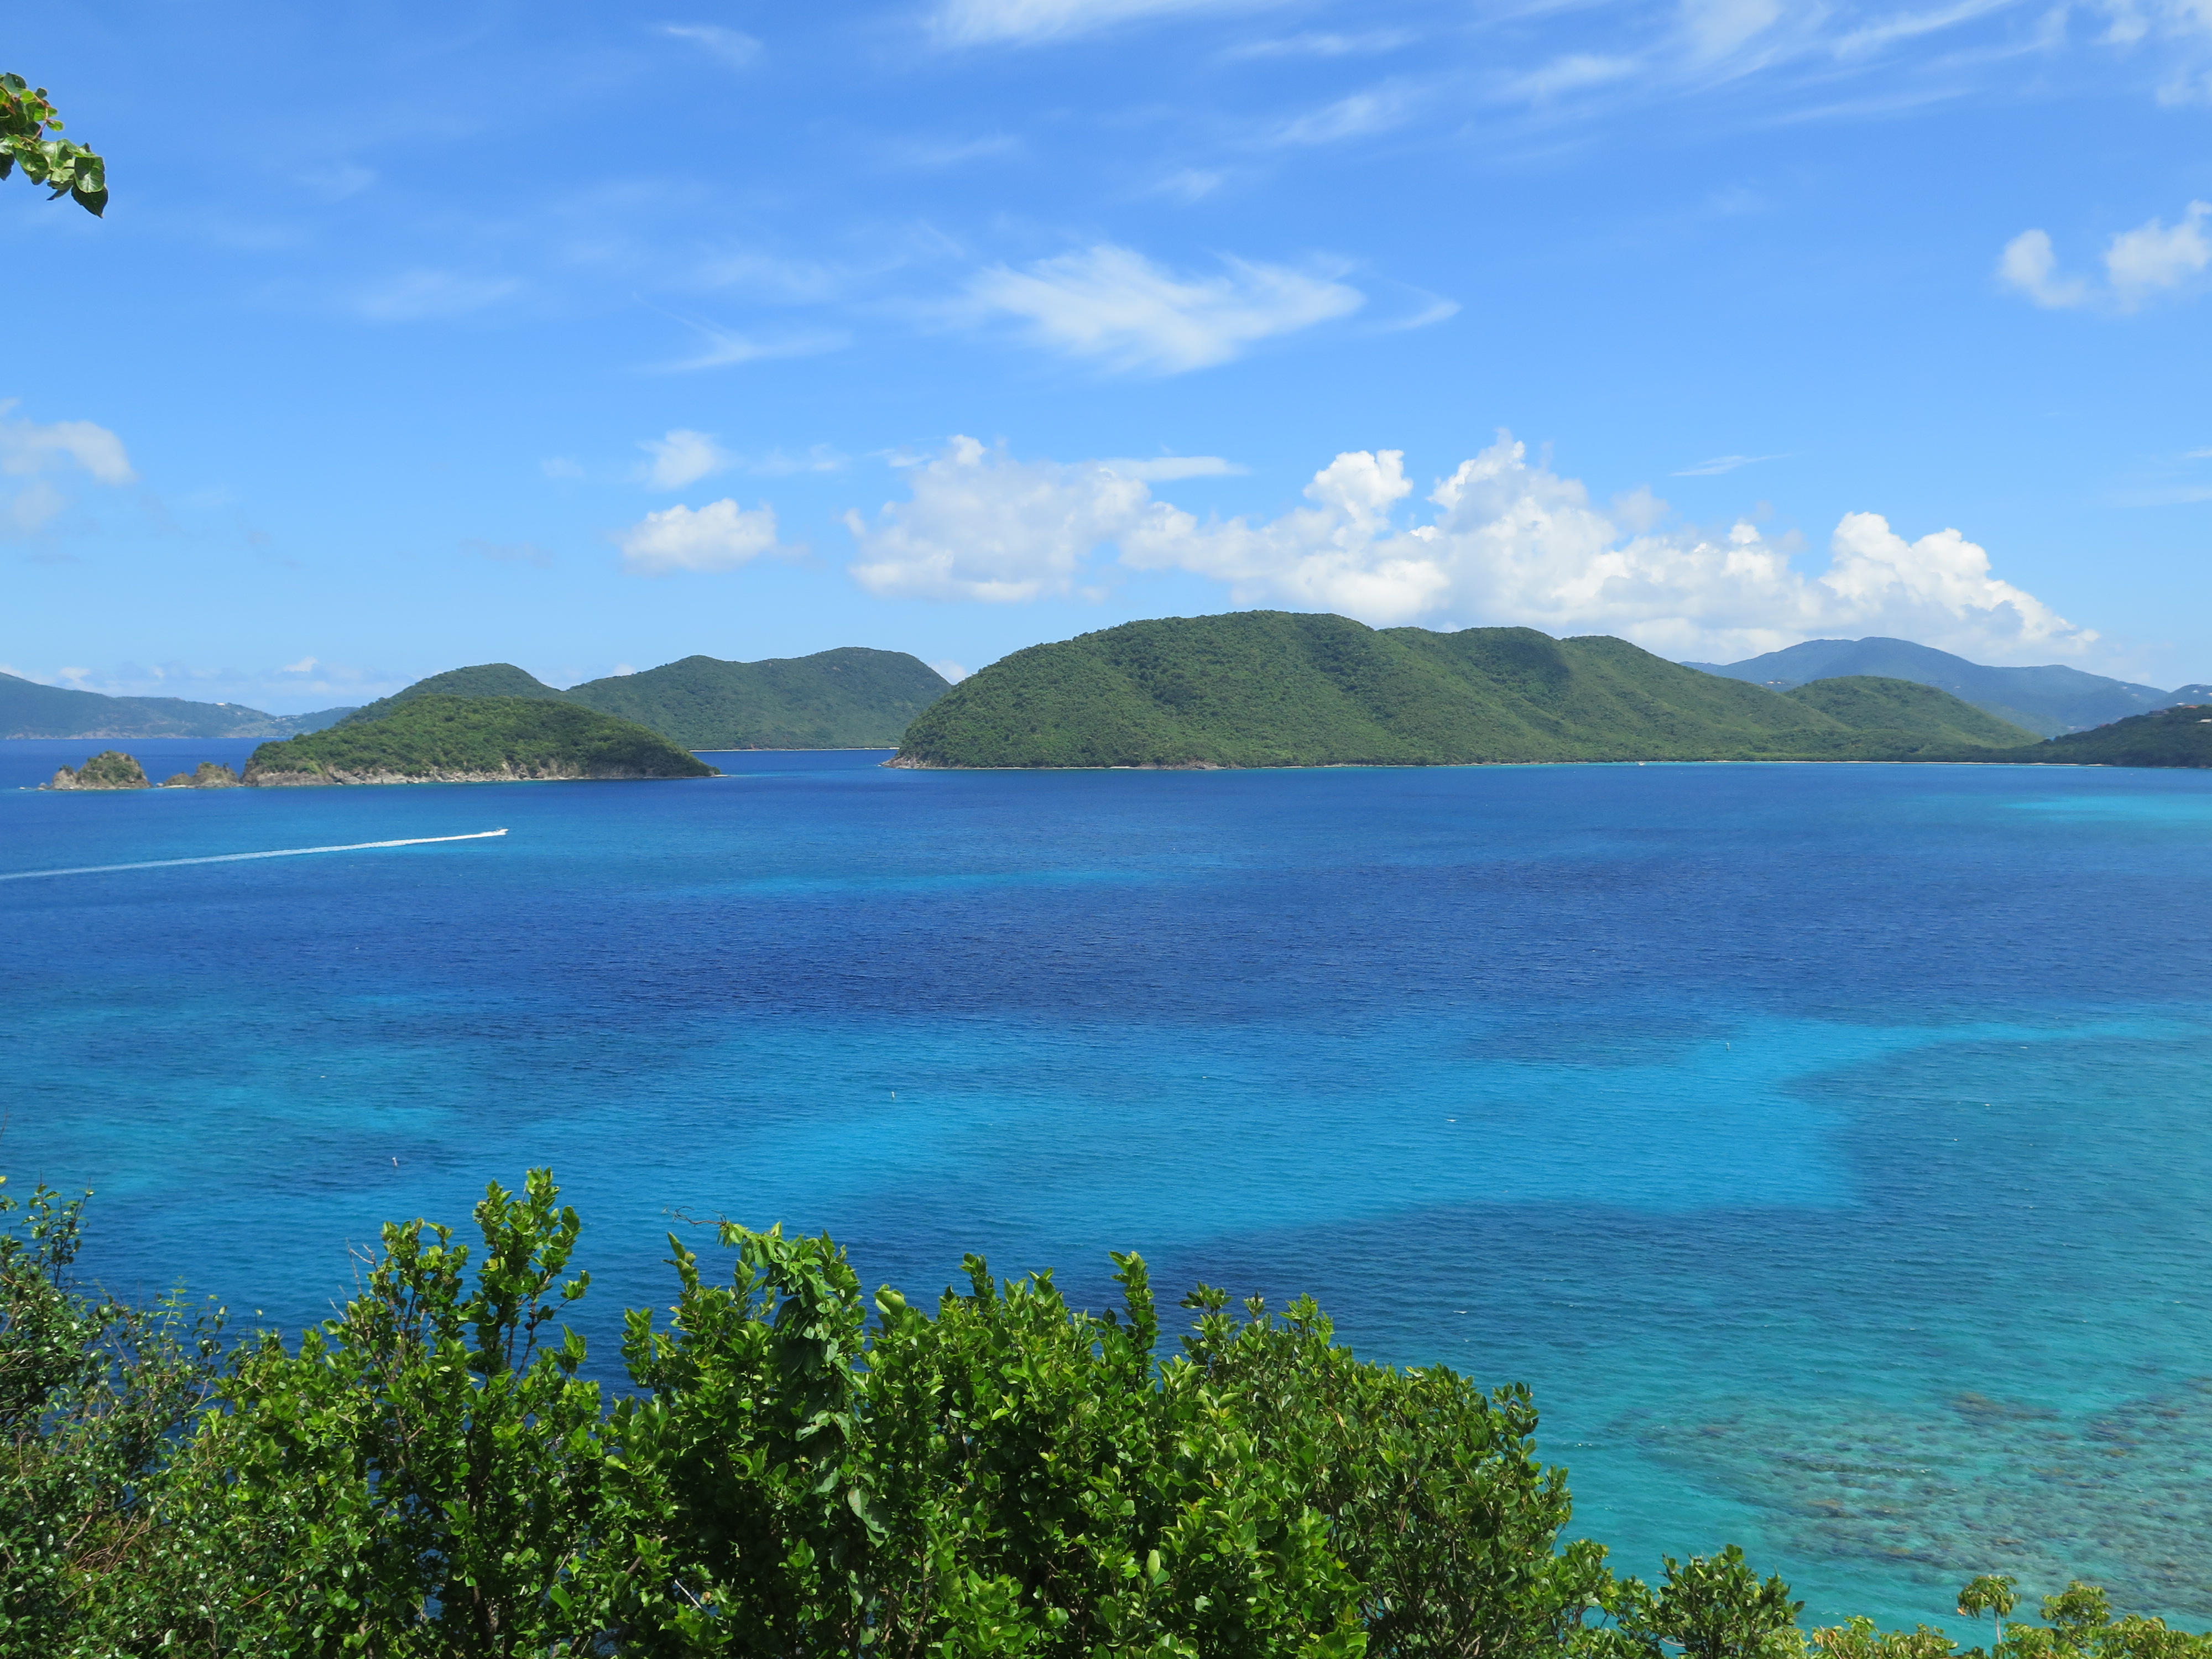 Looking across the blue waters of Virgin Islands National Park, the forested green slopes of Whistling Cay, May Point, and Great Thatch Island stand tall beneath a blue sky dotted with white puffy clouds.